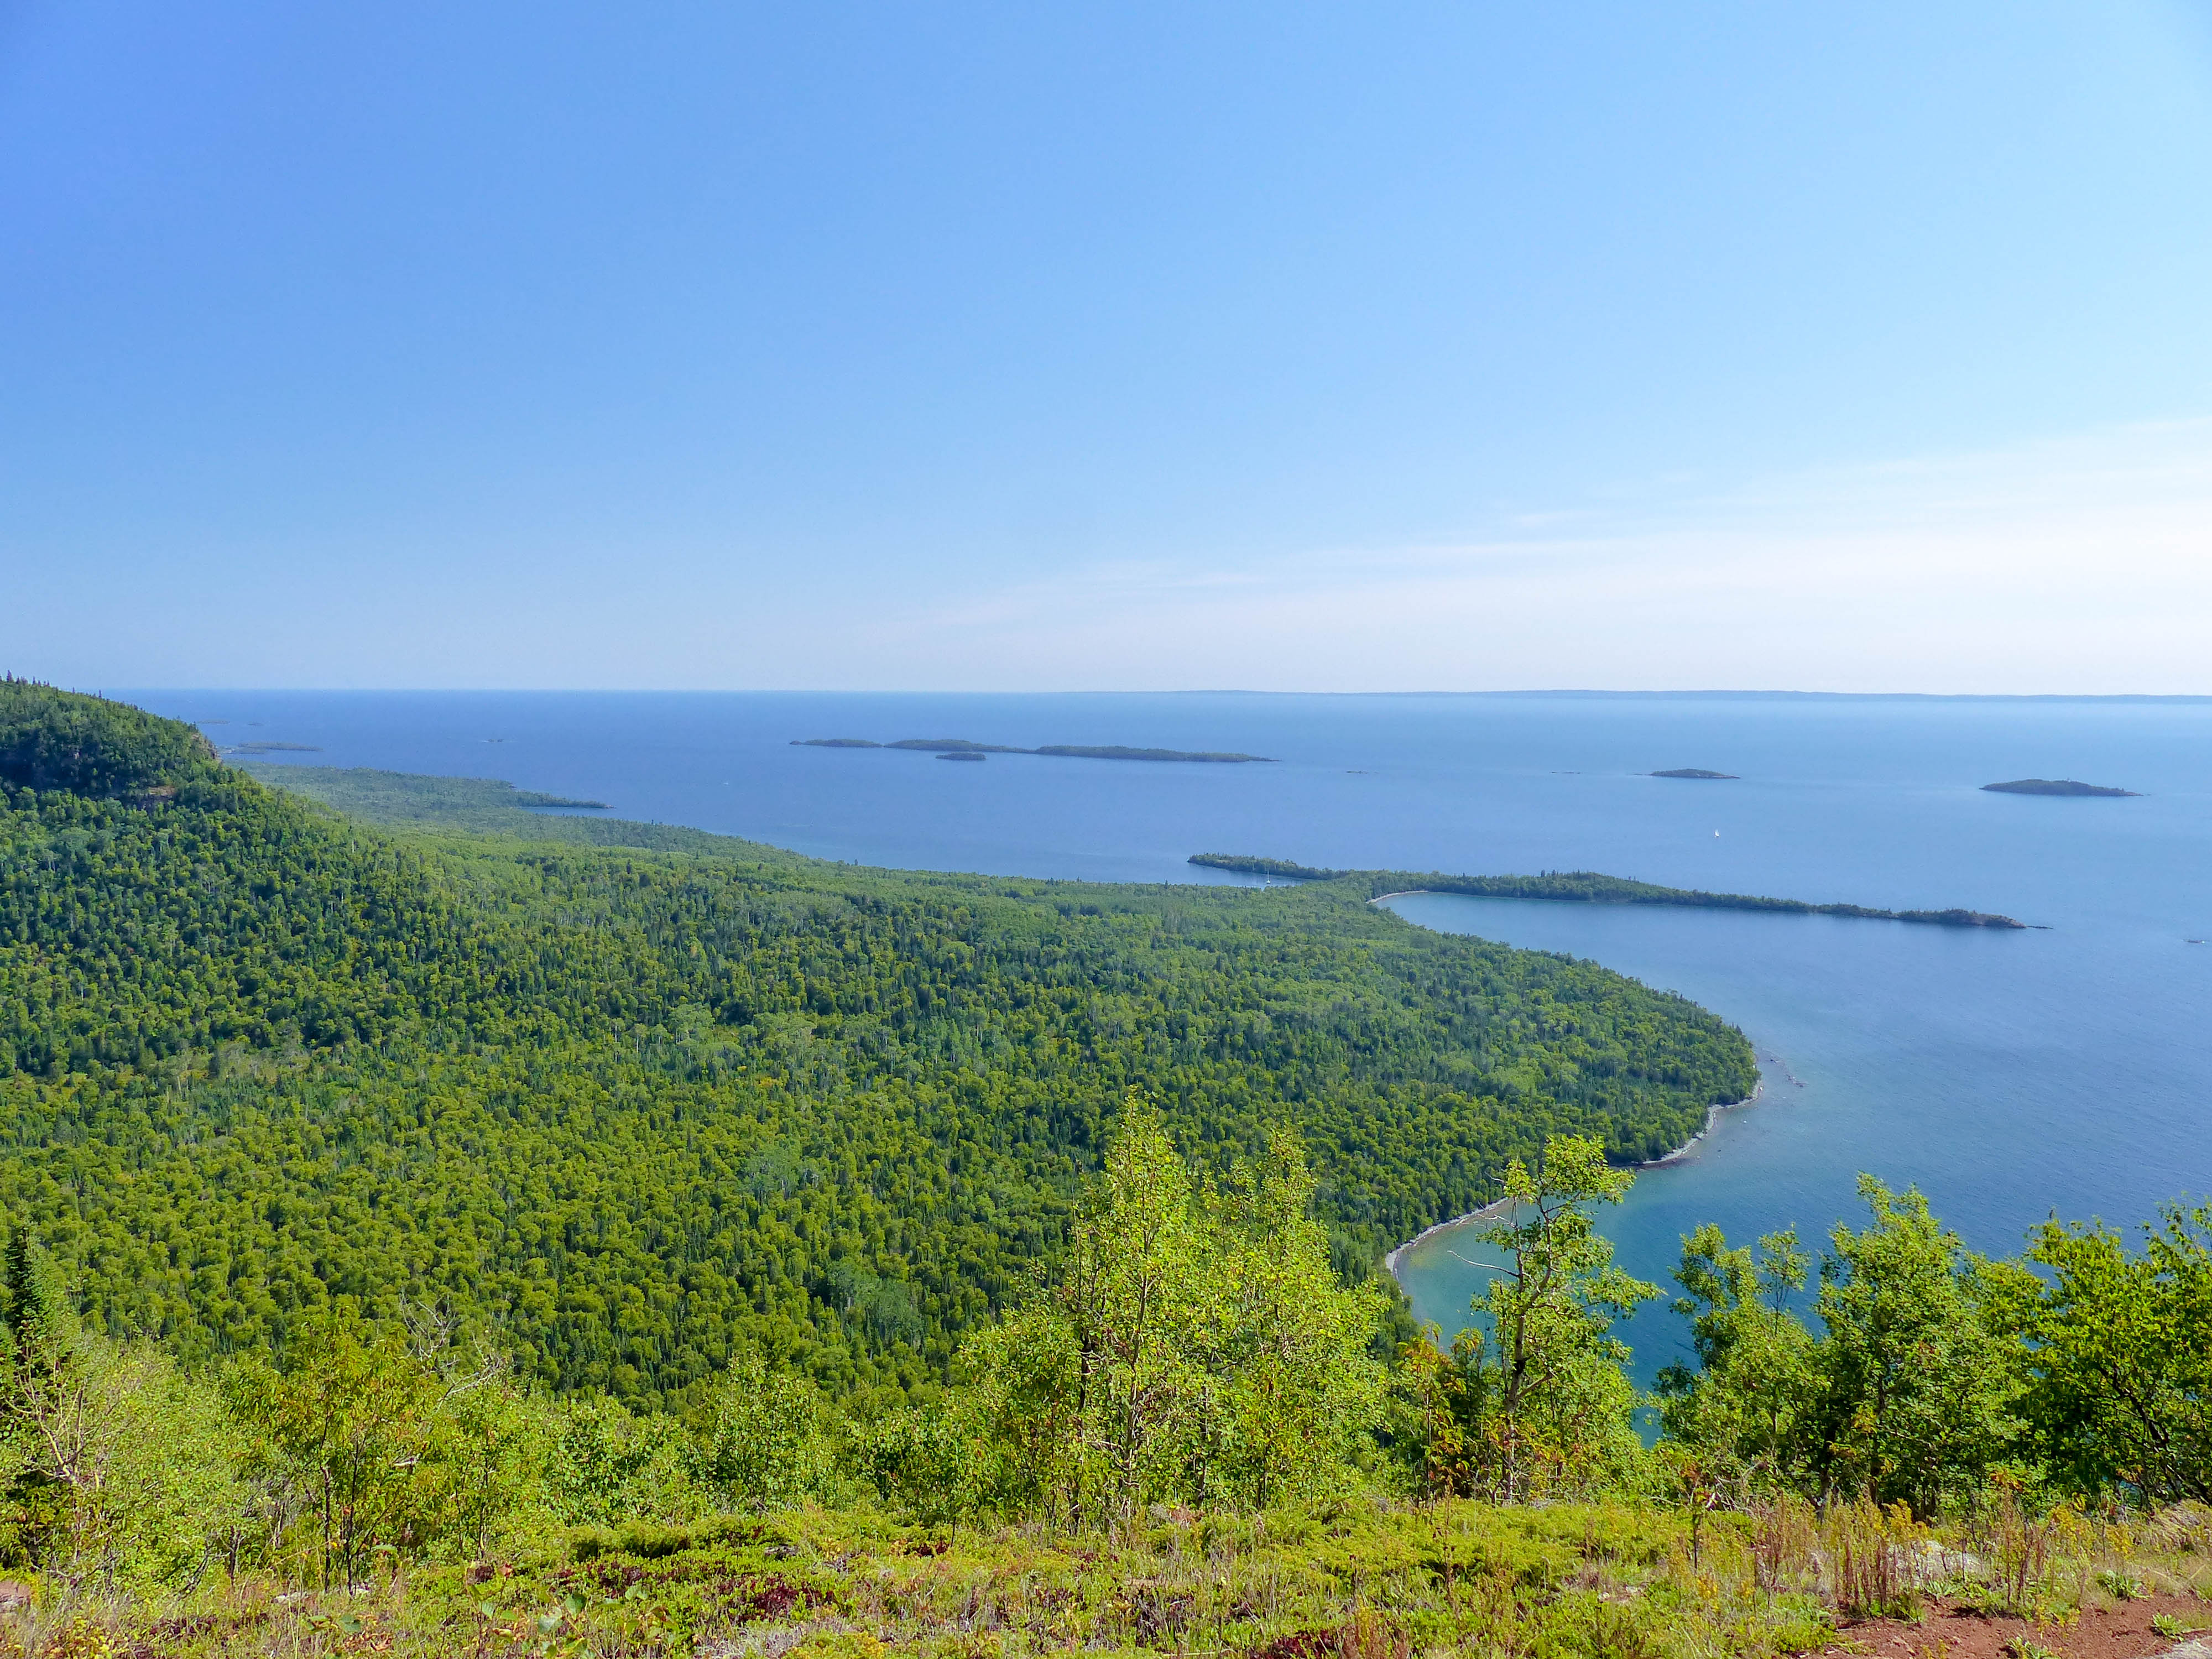 View to the south from the Sleeping Giant of Tee Harbour.